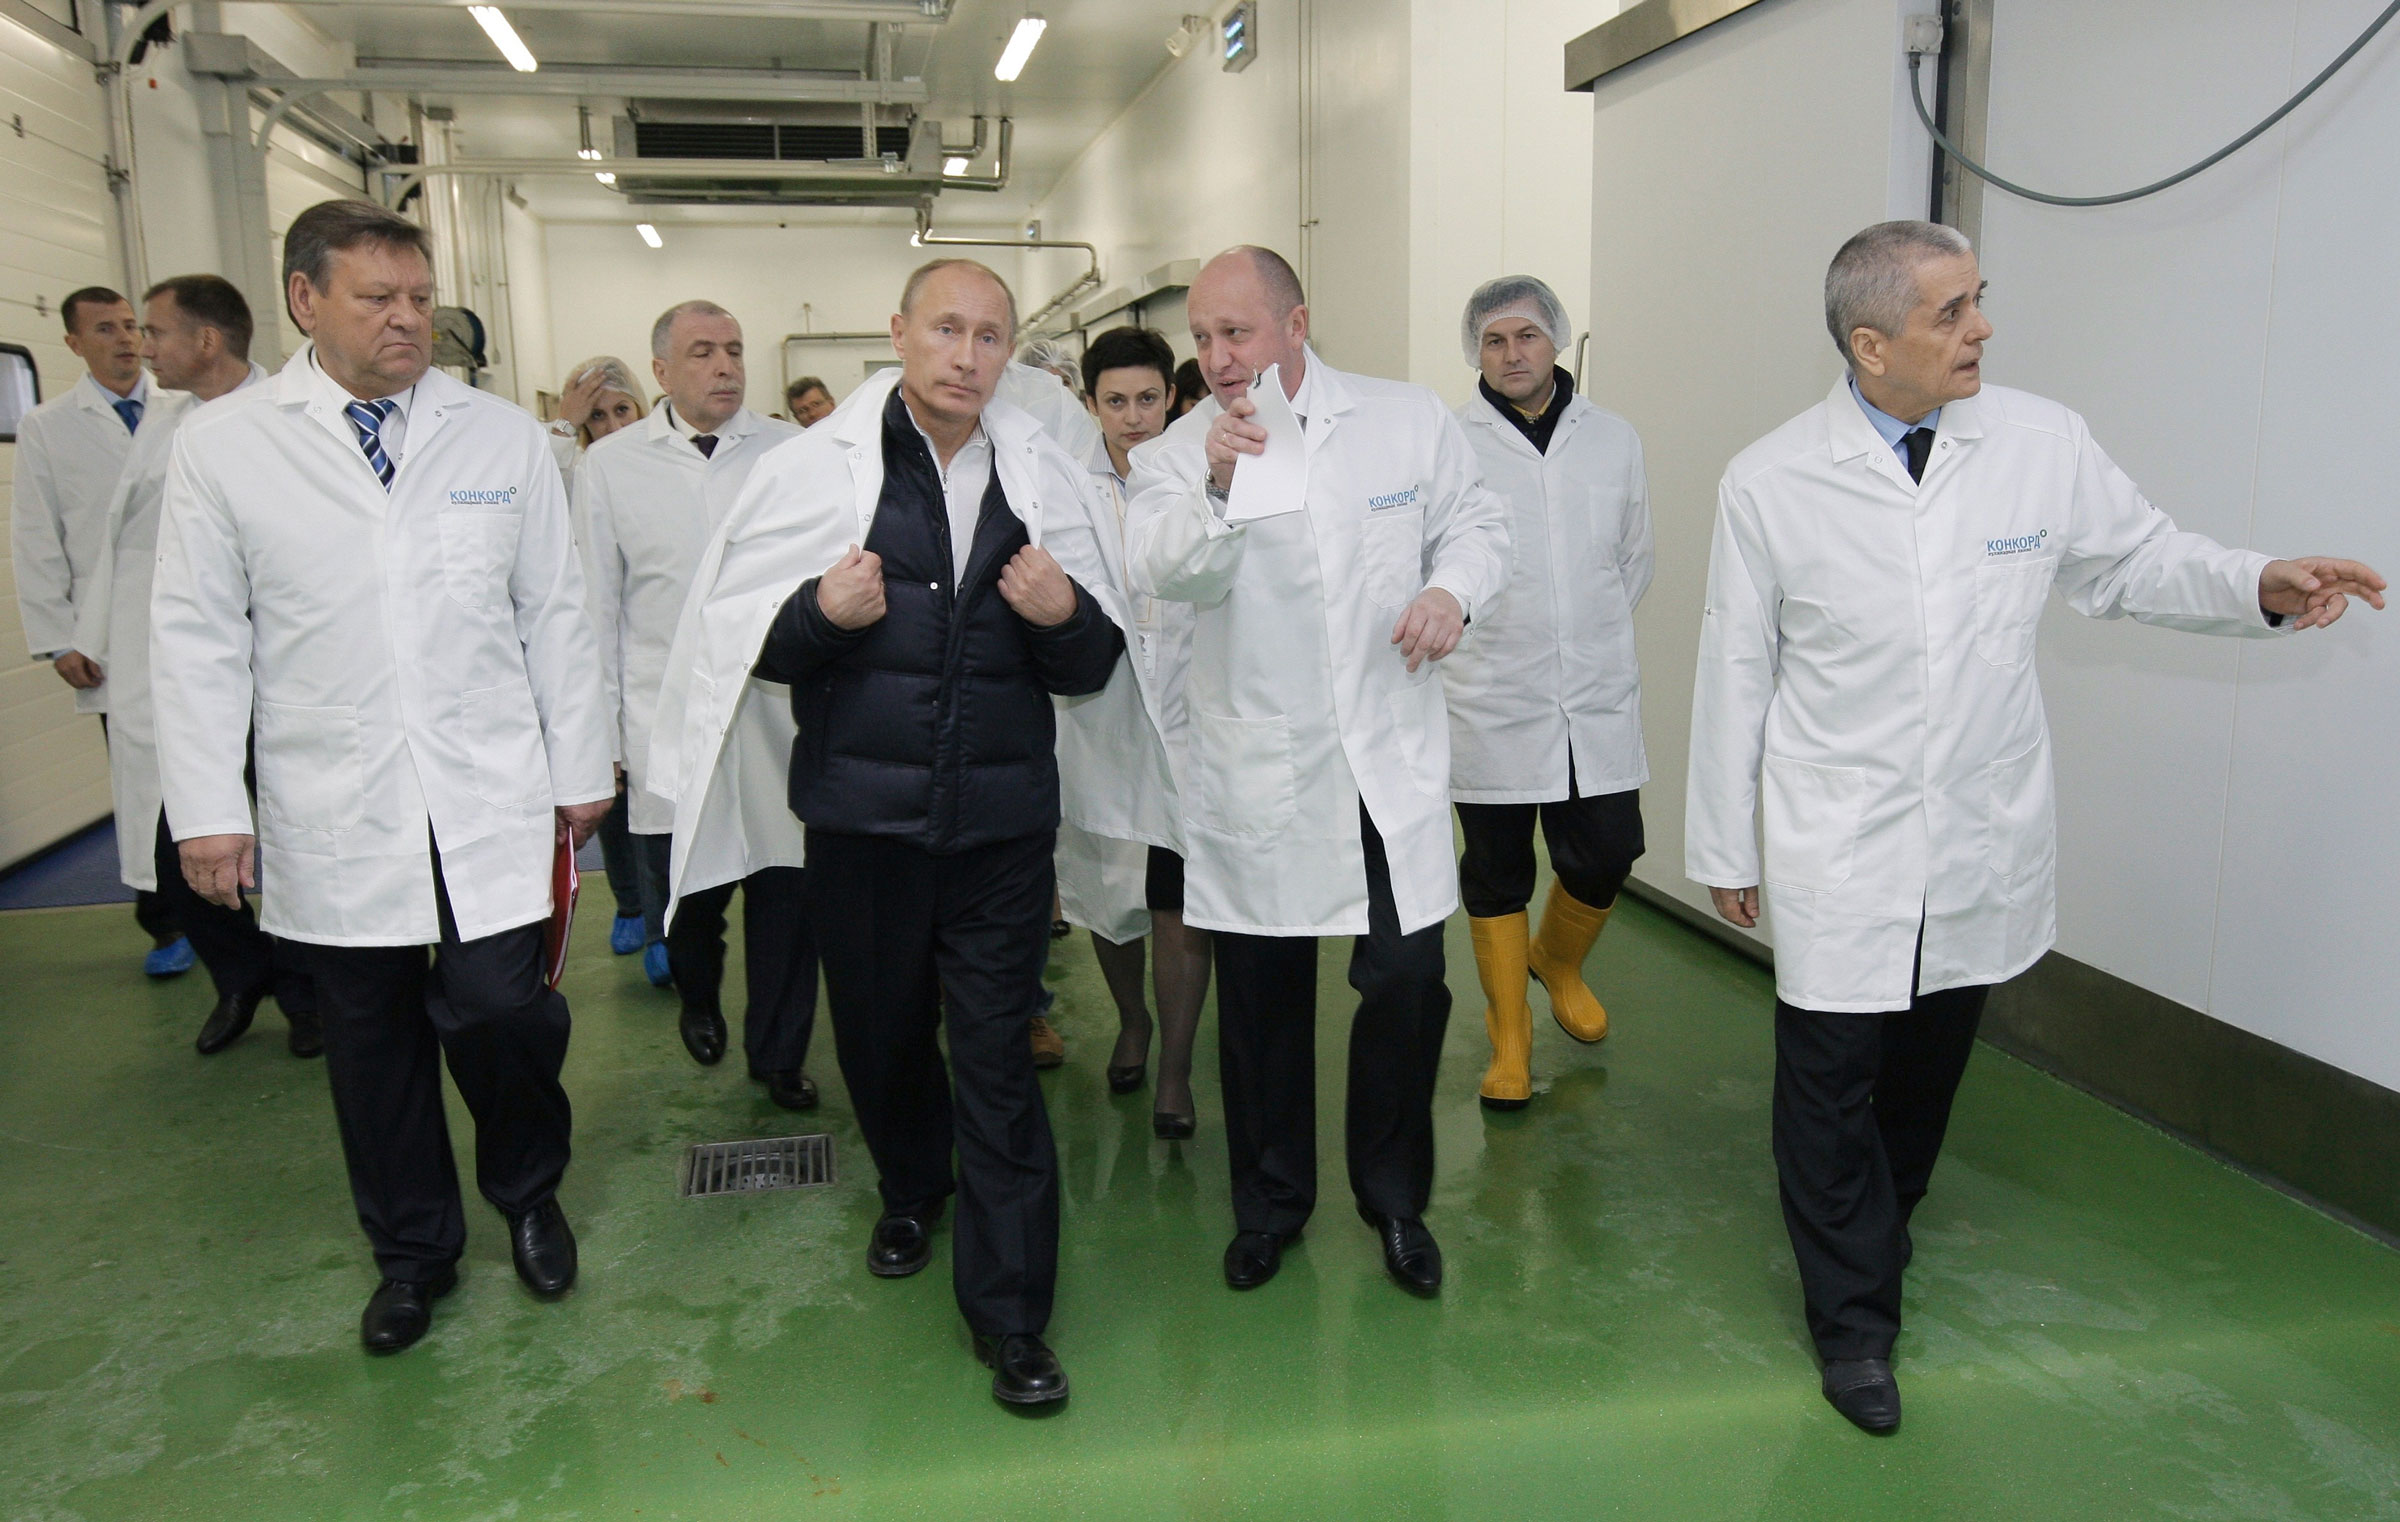 Yevgeny Prigozhin, center right, with President Vladimir Putin at his school lunches factory outside St. Petersburg, Russia, on Sept. 20, 2010. (Alexei Druzhinin—Pool/The New York Times/Redux)